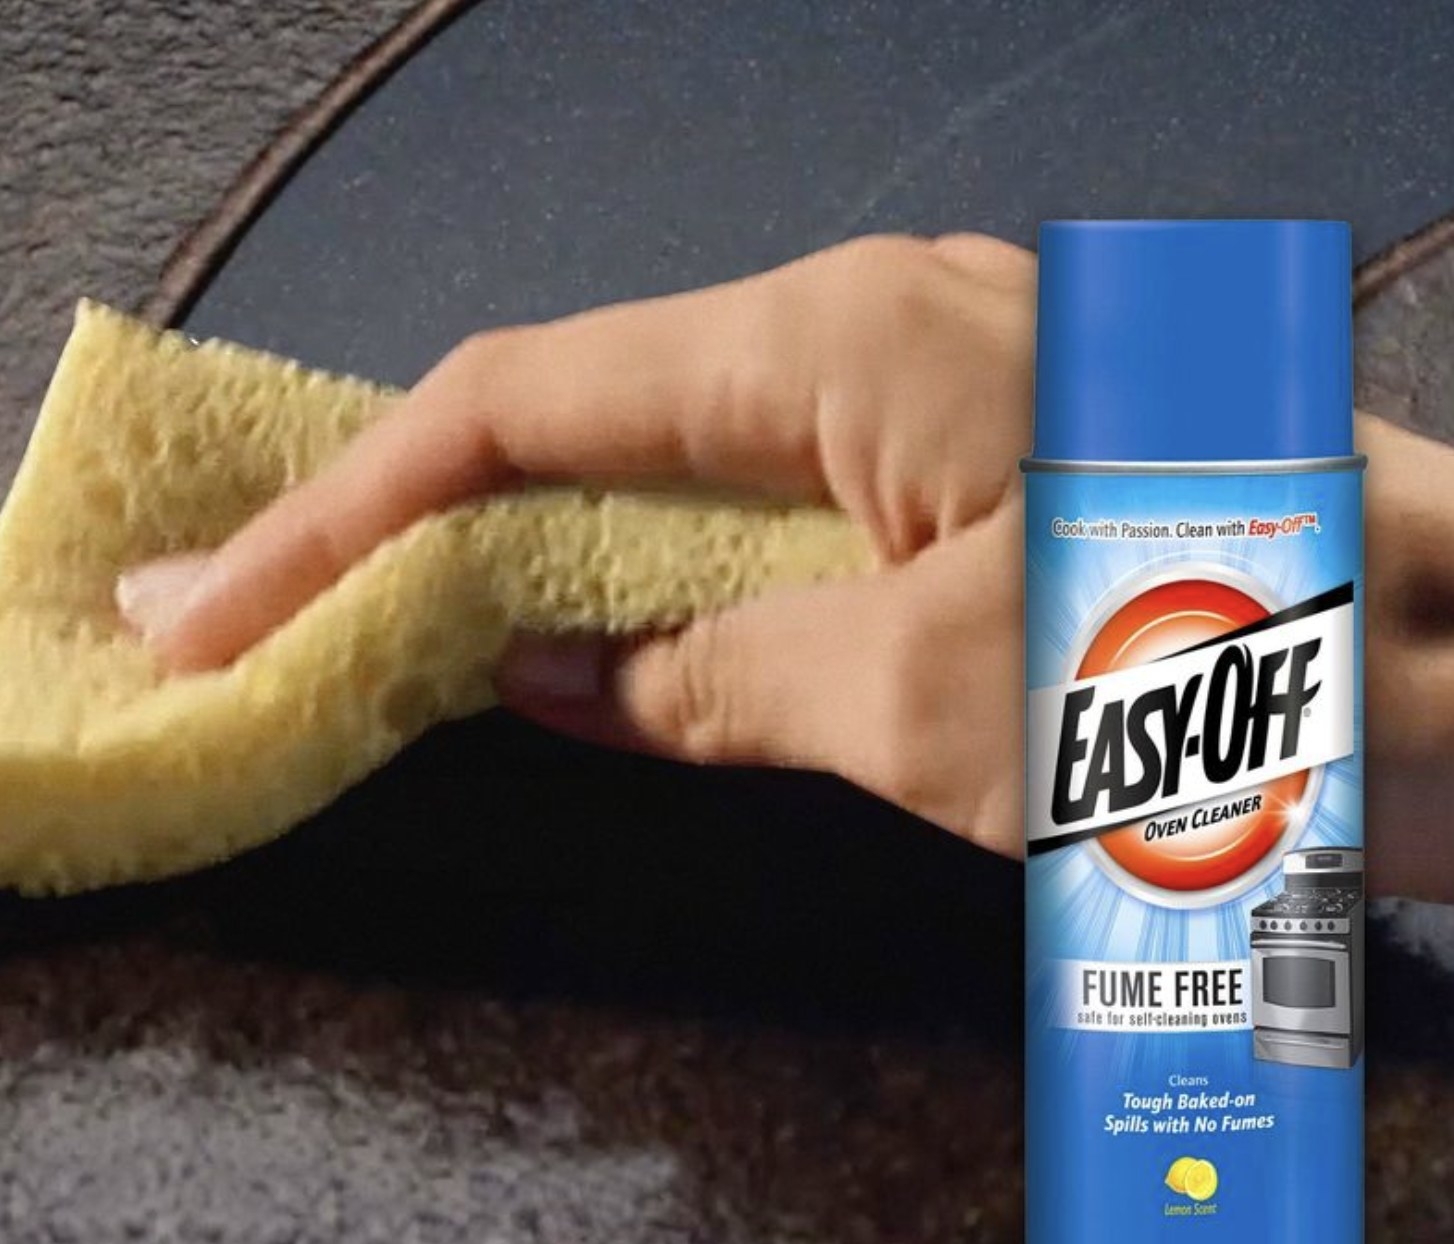 A hand using a yellow sponge behind a can of oven cleaner